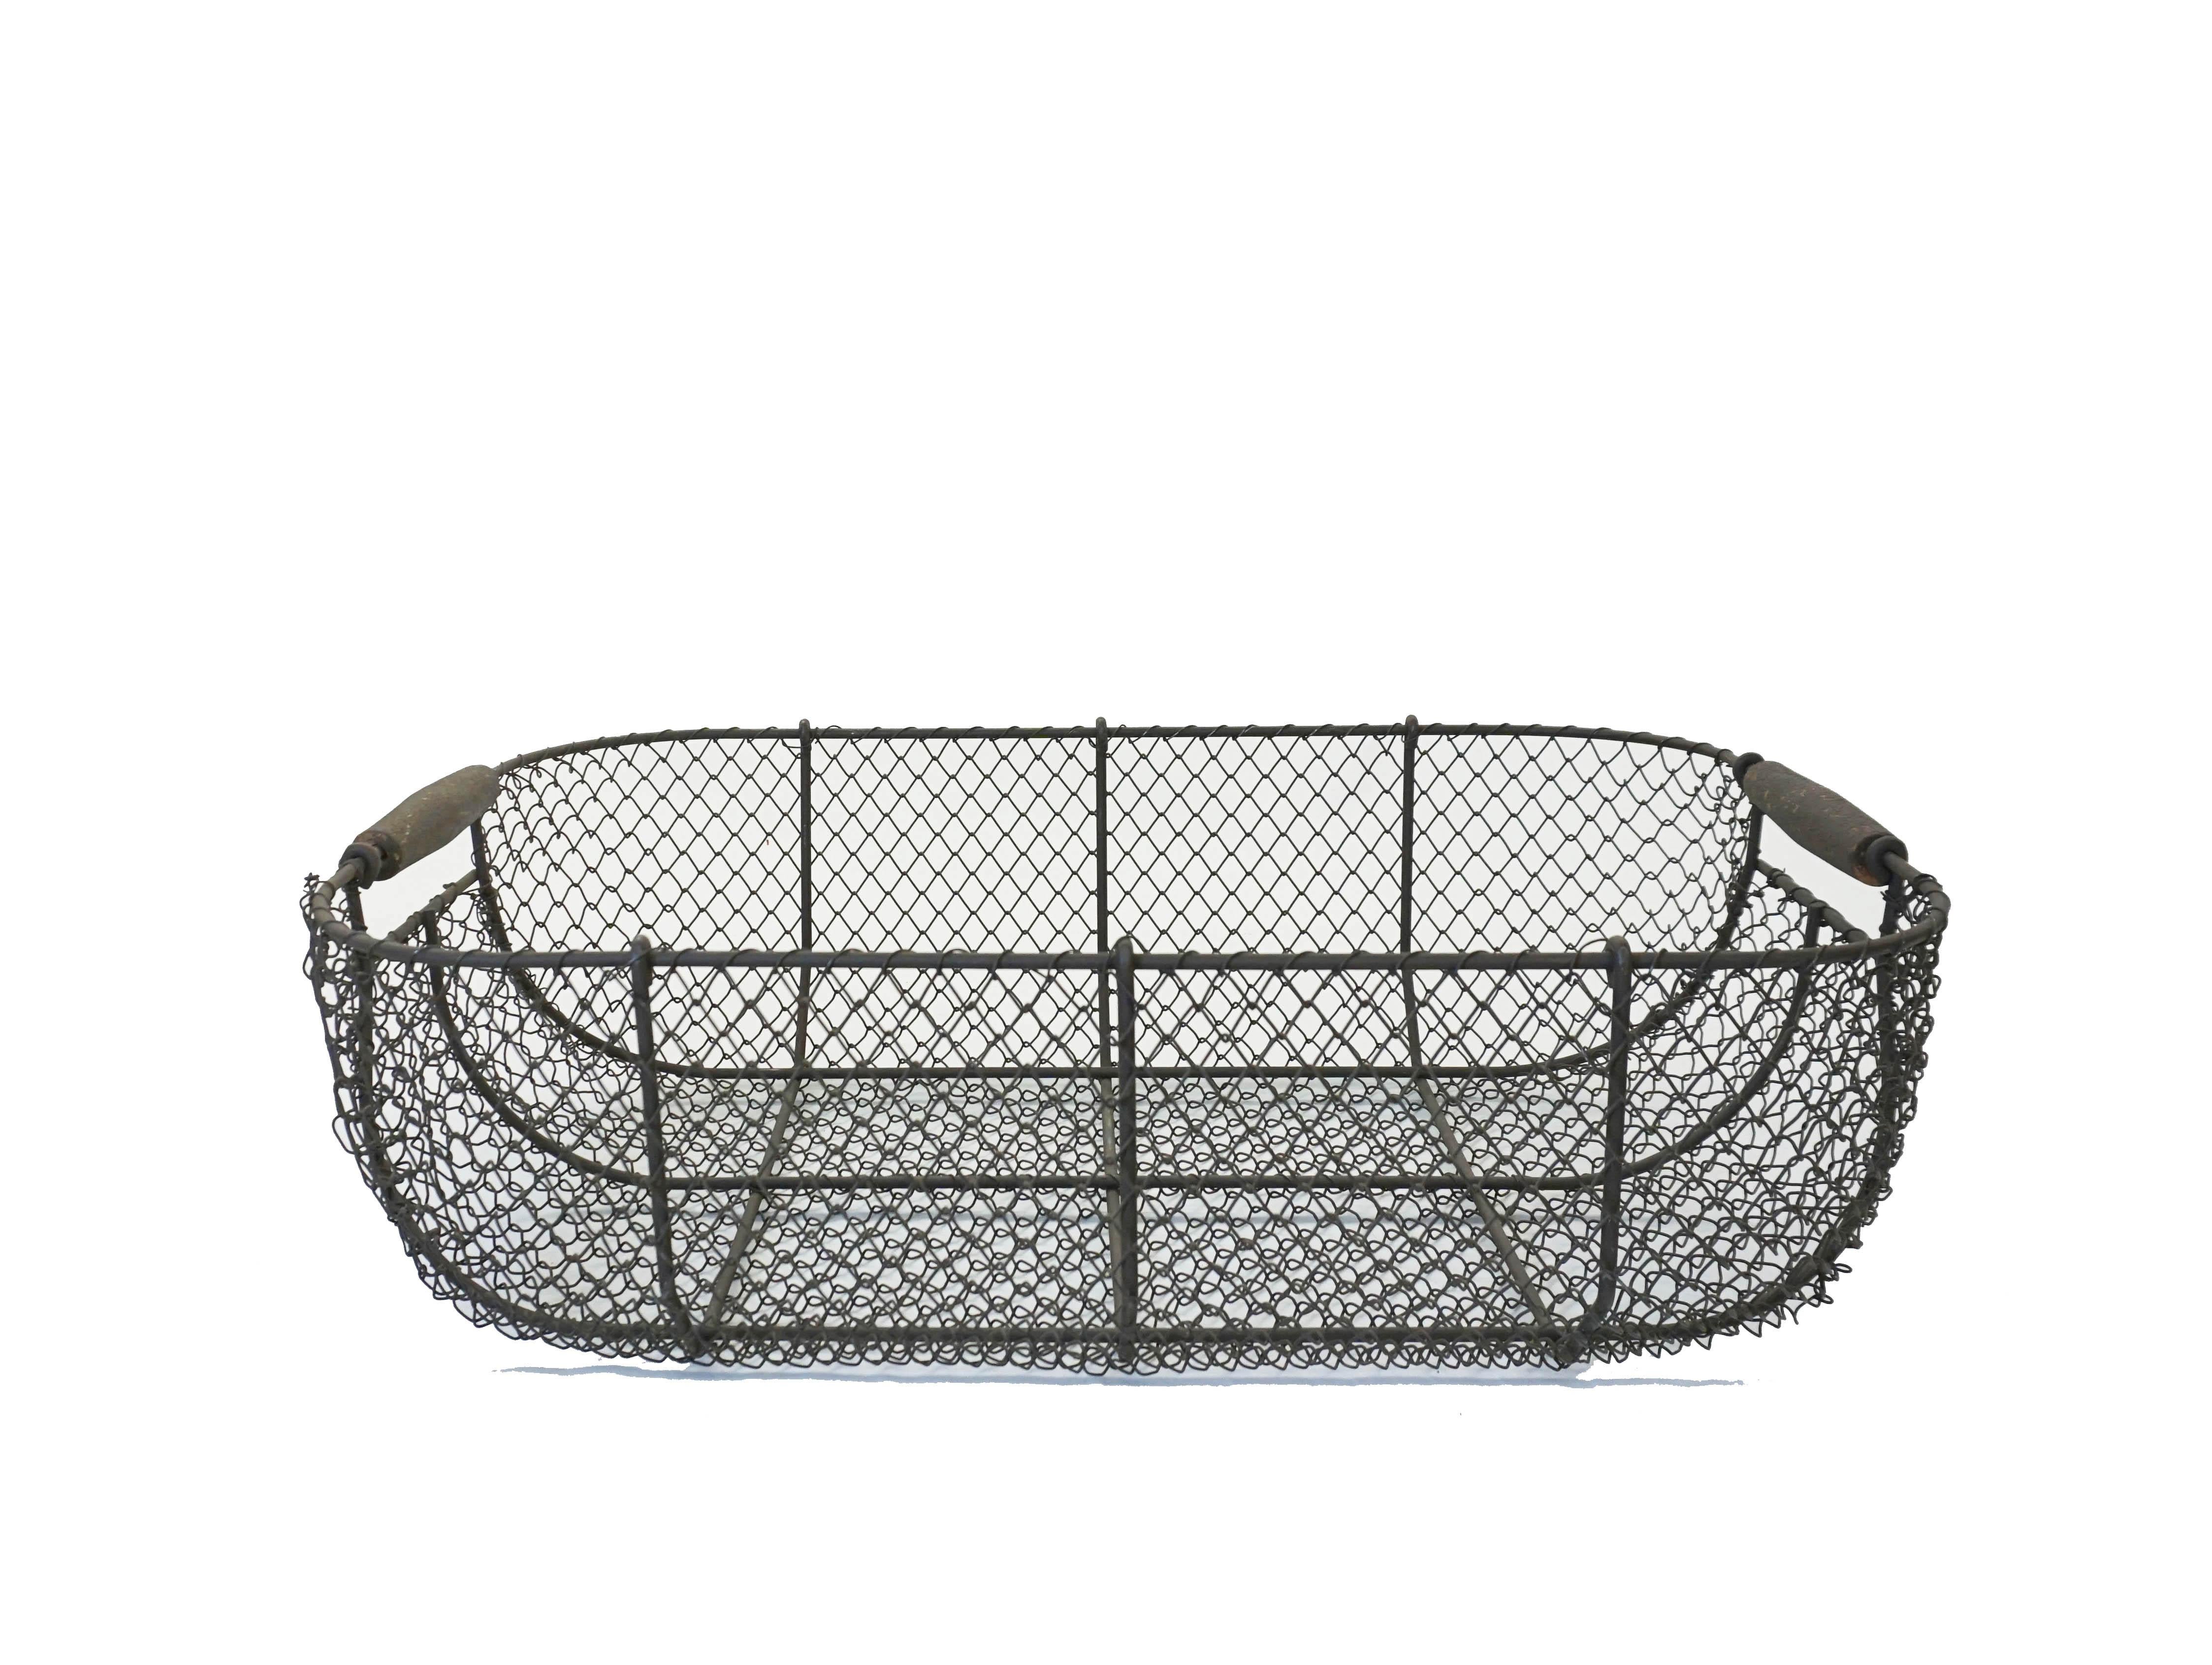 Large woven wire basket with rolled wood handles. This is a well crafted vintage piece from France in the mid 20th century. Use it as a table centerpiece or as a decorative item anywhere in the home.